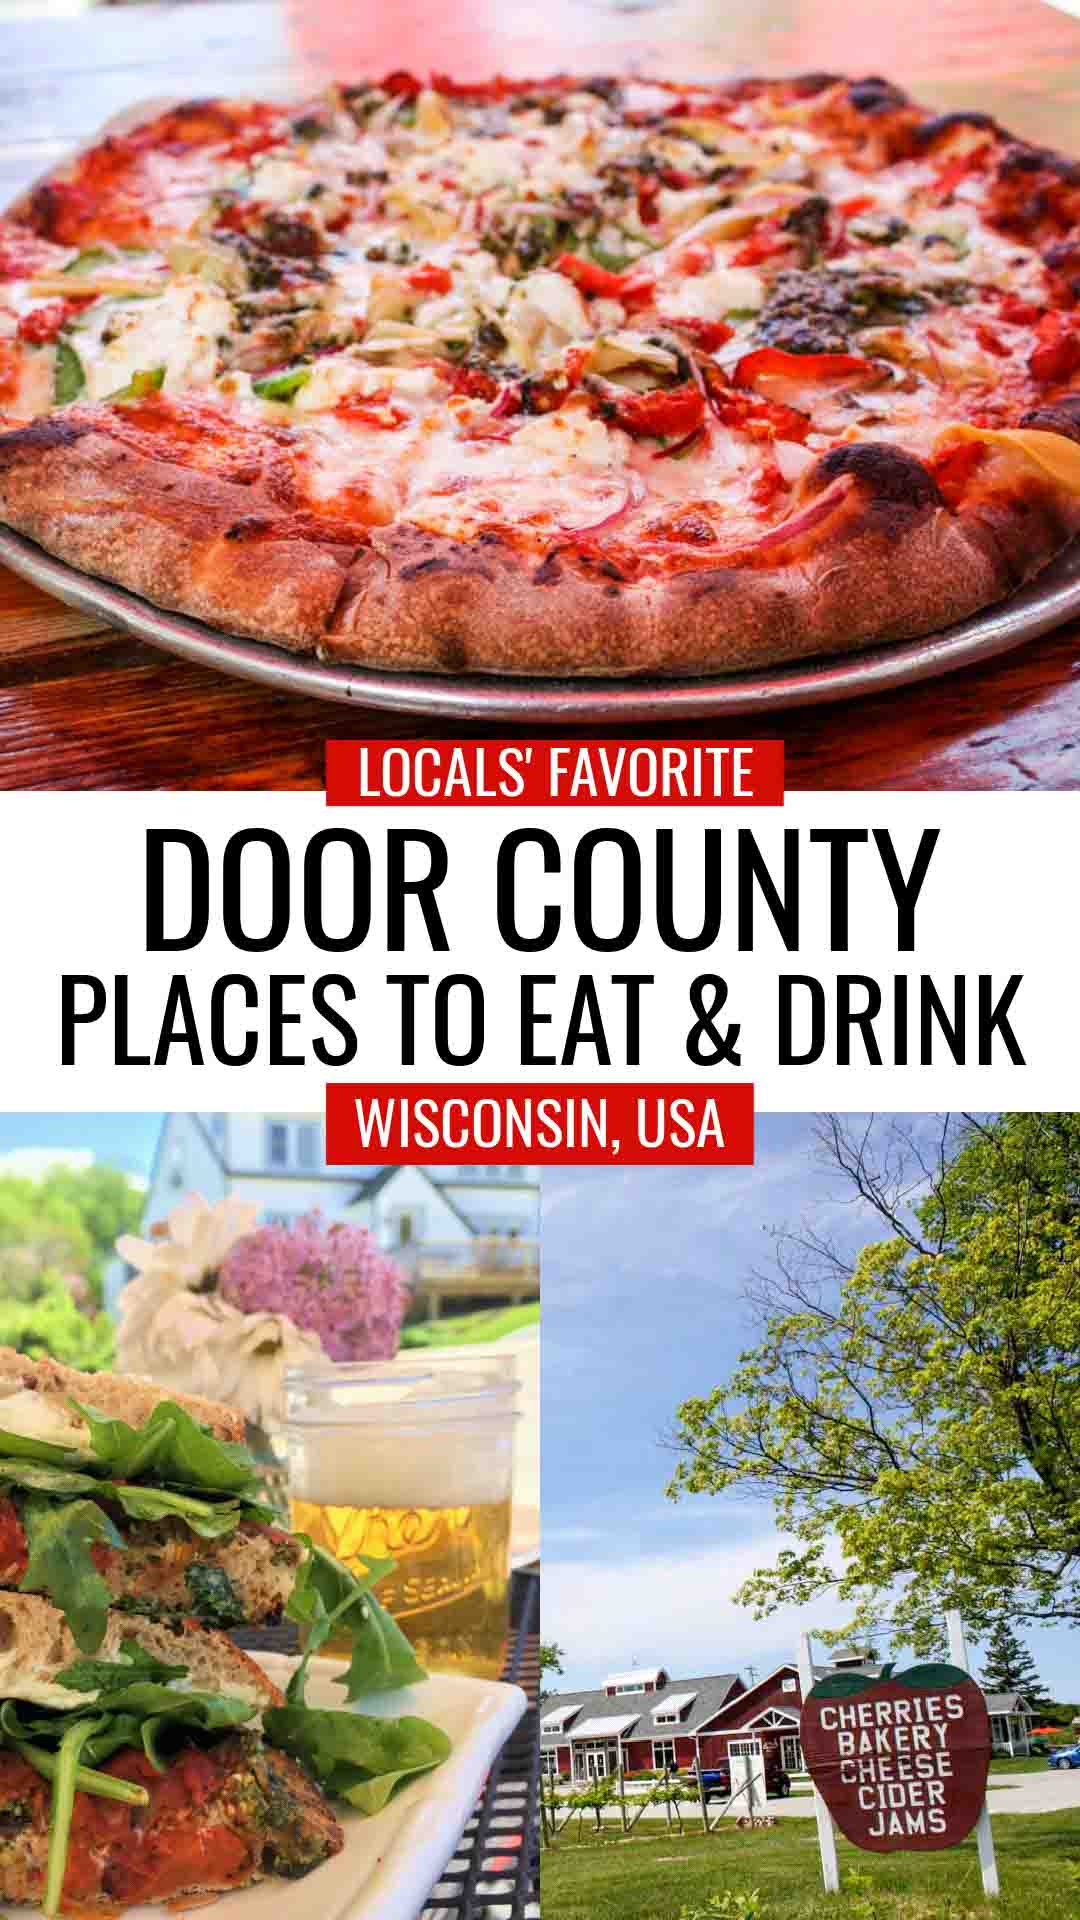 Local's favorite places to eat and drink in Door County, Wisconsin, USA, including pizza at Wild Tomato (top image), Lautenbach's Orchard Country Winery & Market, and Door County Creamery